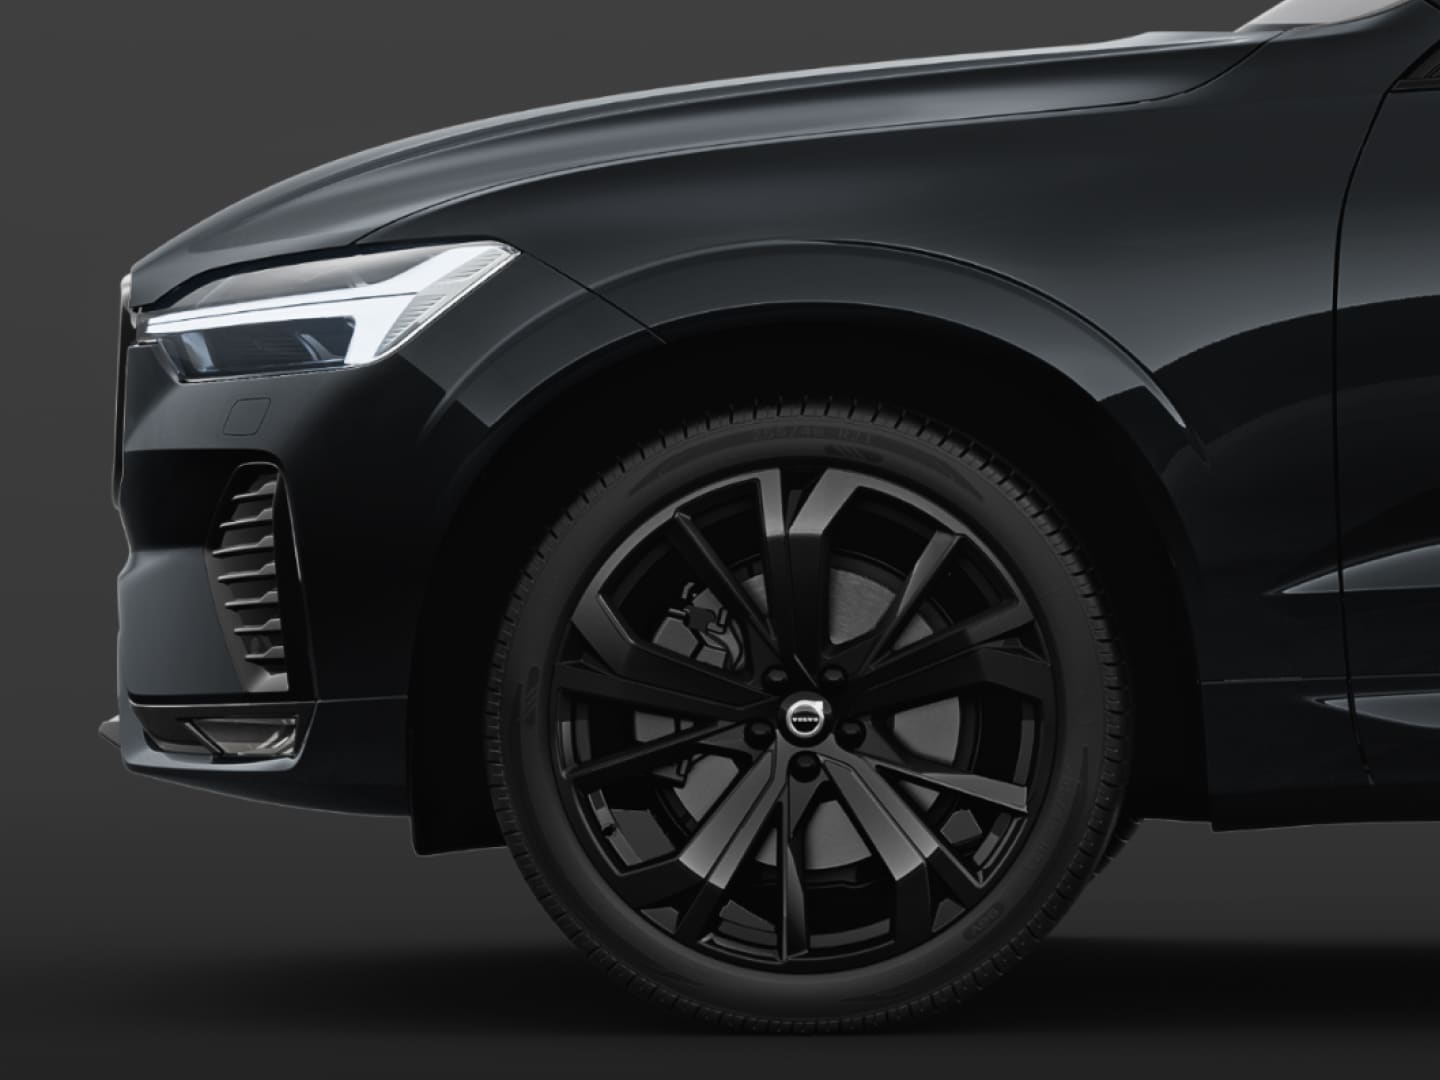 The glossy black double-spoked rims of the Volvo XC60 Black Edition Mild hybrid.